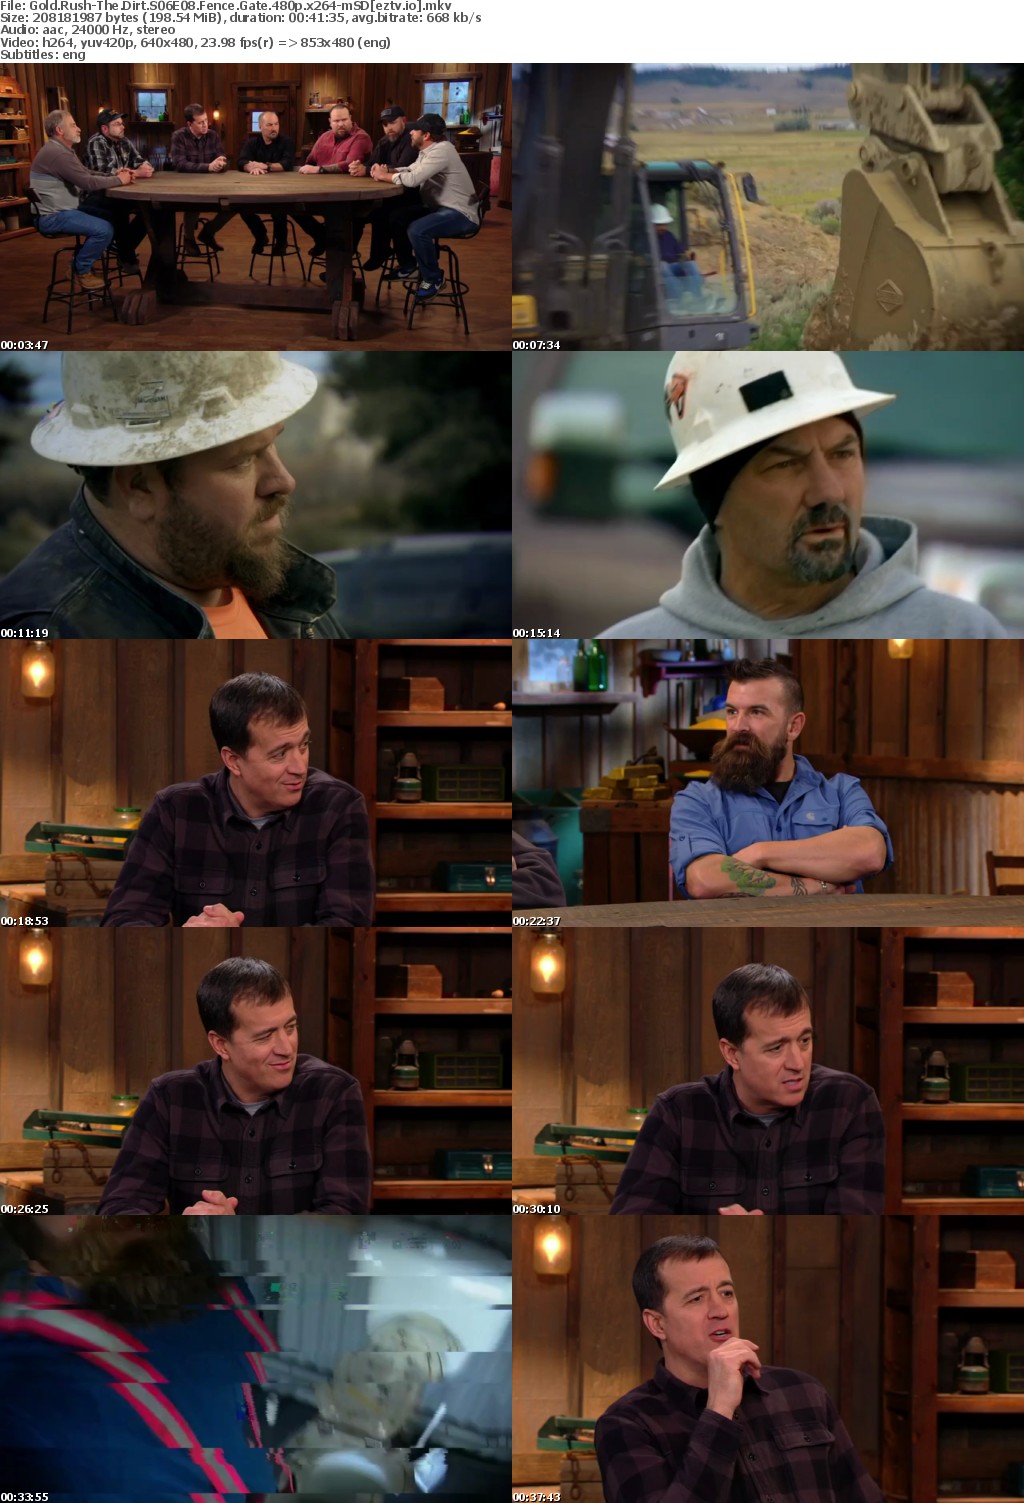 Gold Rush-The Dirt S06E08 Fence Gate 480p x264-mSD